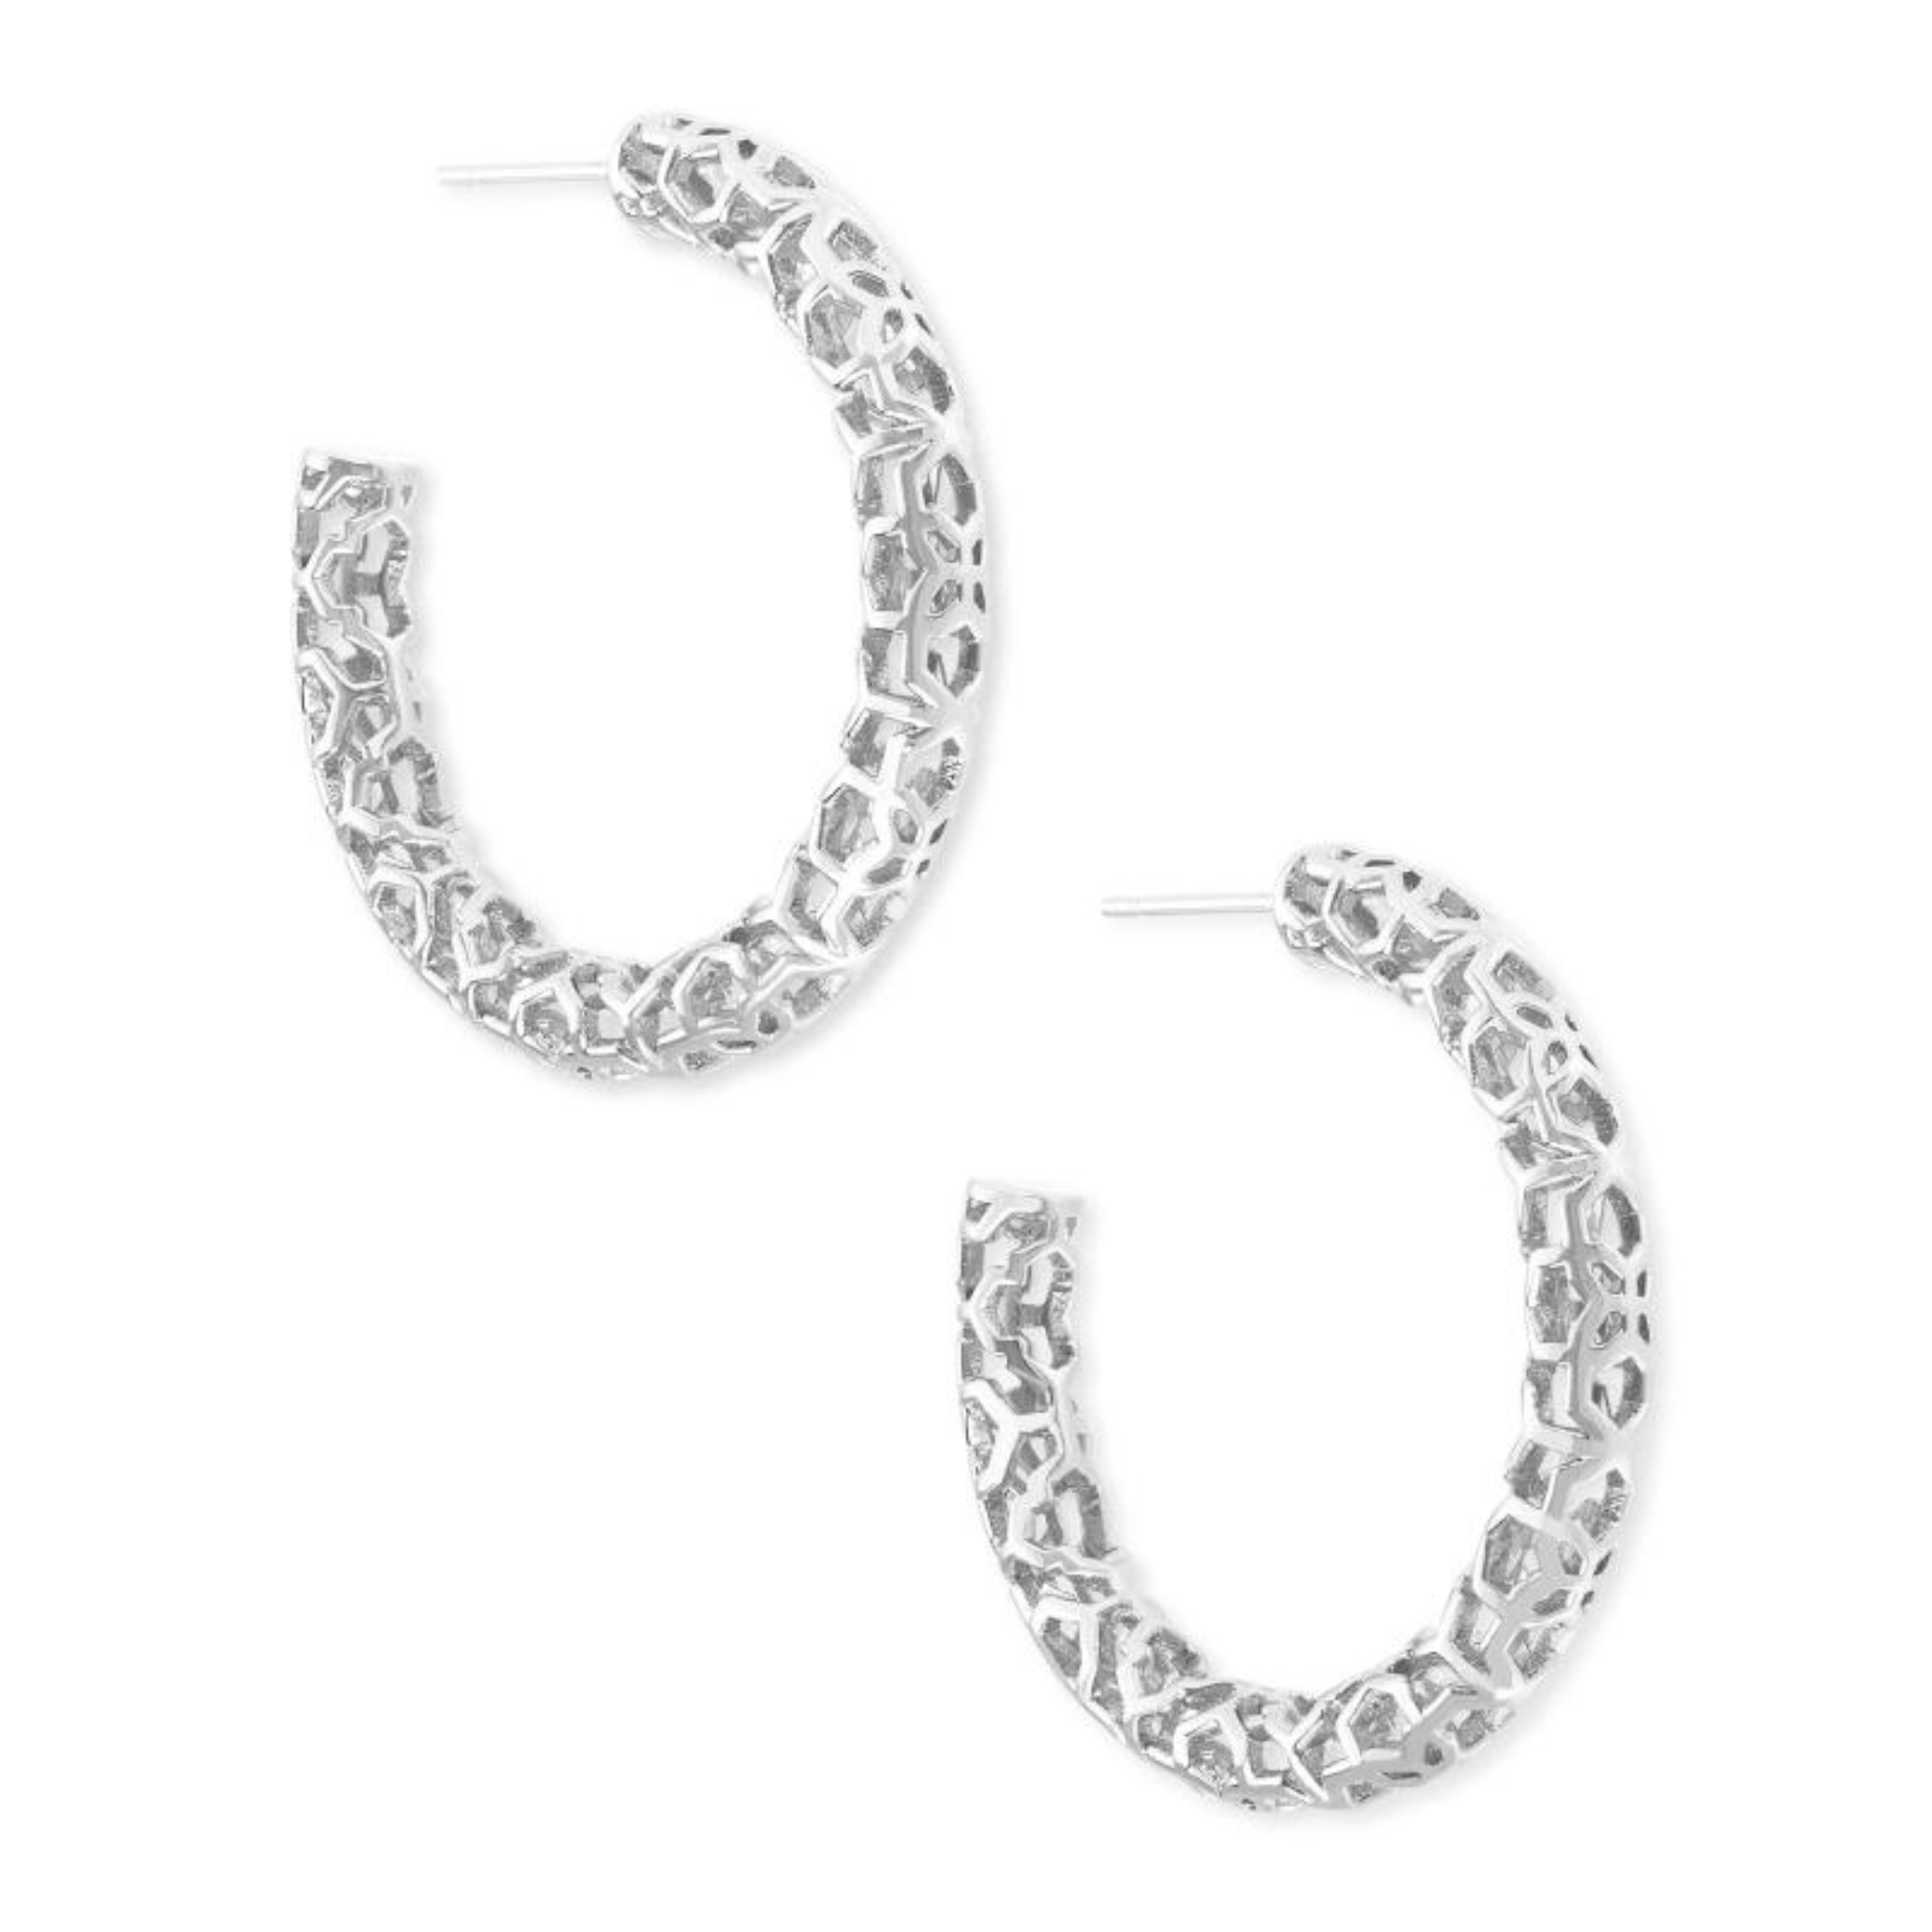 Silver hoop earrings with filigree detailing, pictured on a white background.